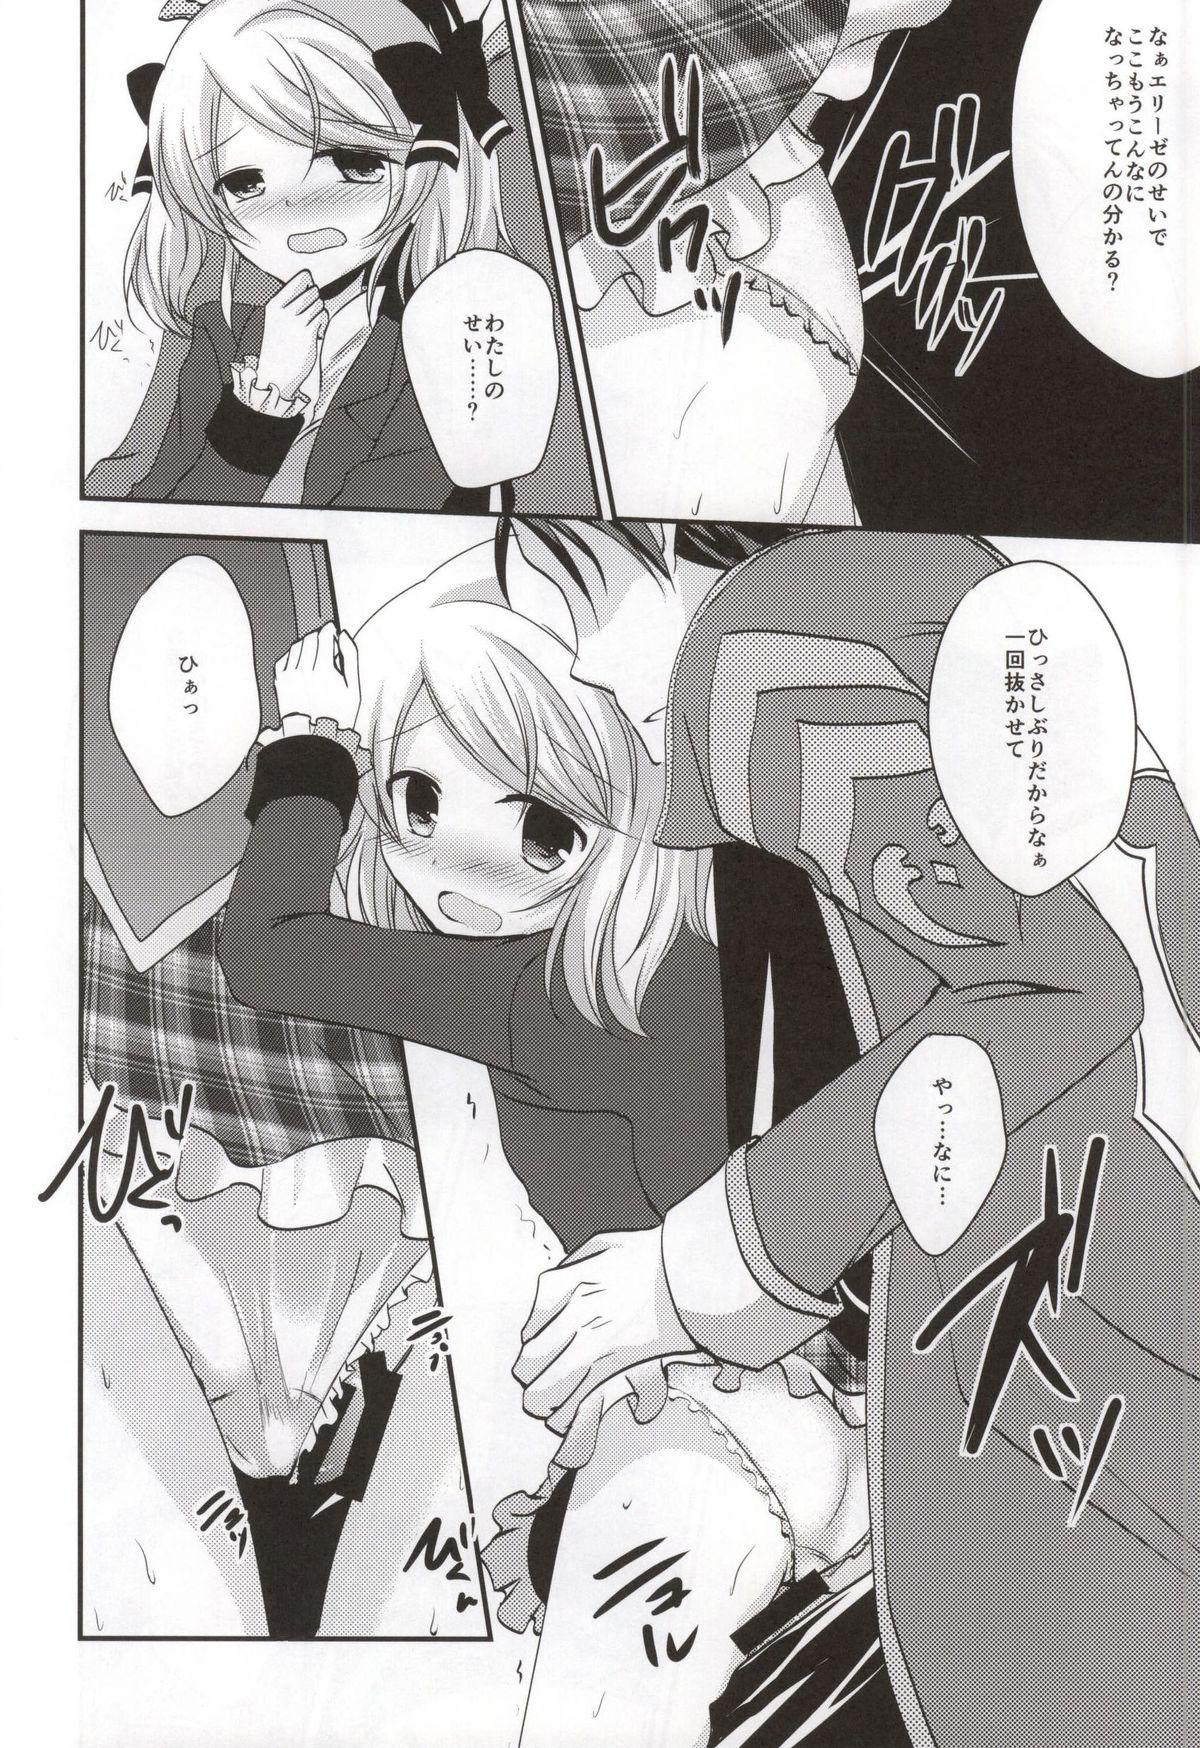 Horny Sluts Gekijou Another - Tales of xillia Straight - Page 10